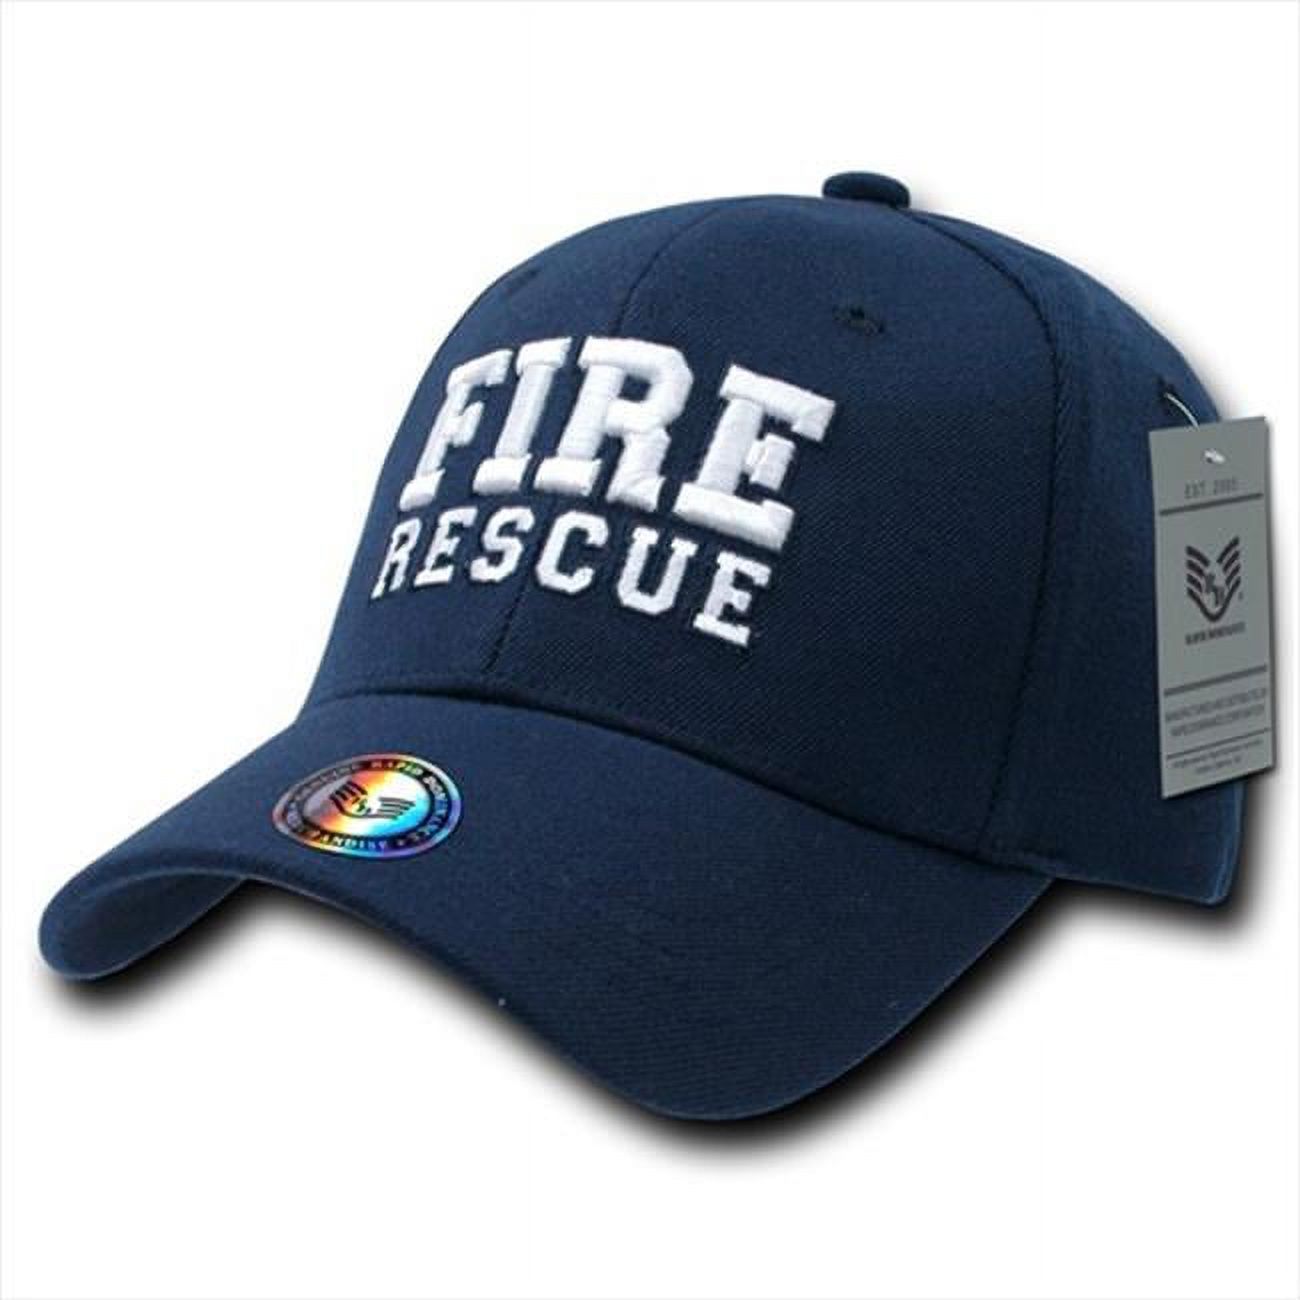 Rapid Dominance Fire Rescue FitAll Flex Mens Cap [Navy Blue - L/XL] - image 1 of 2